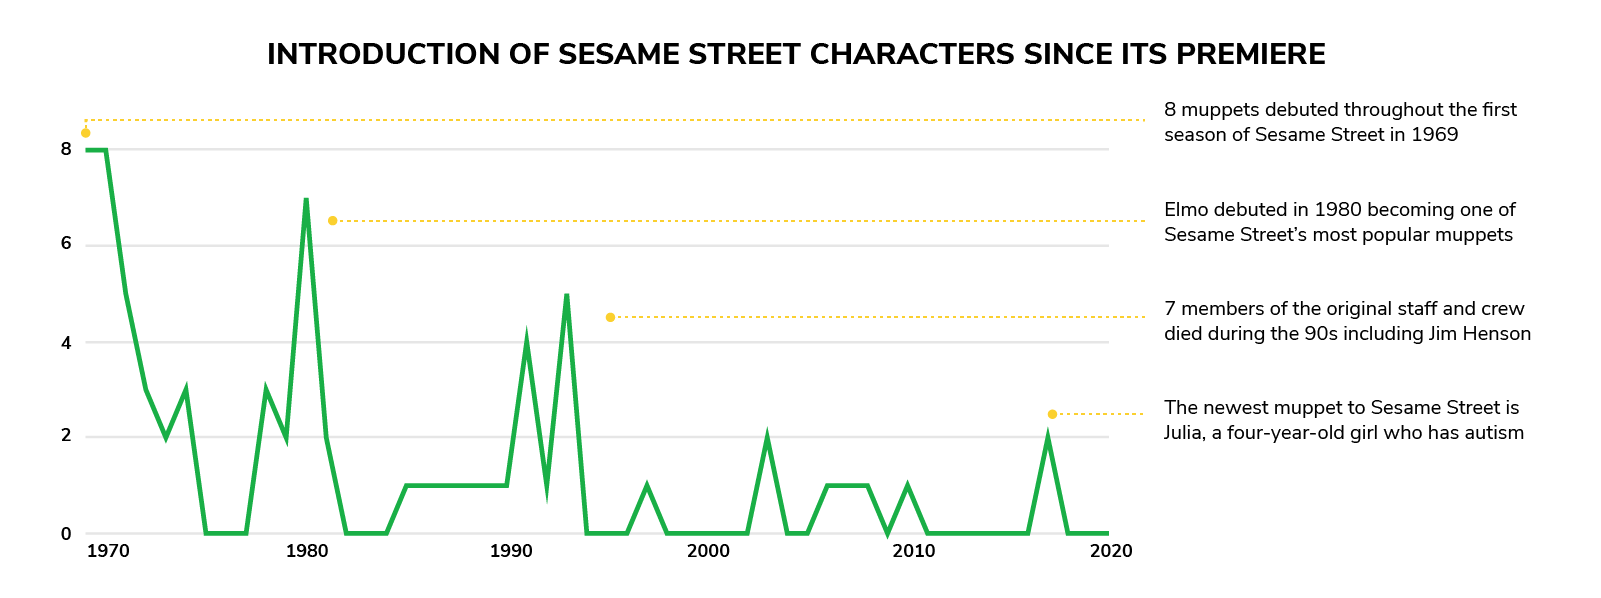 Infographic showing change in sesame street quantities